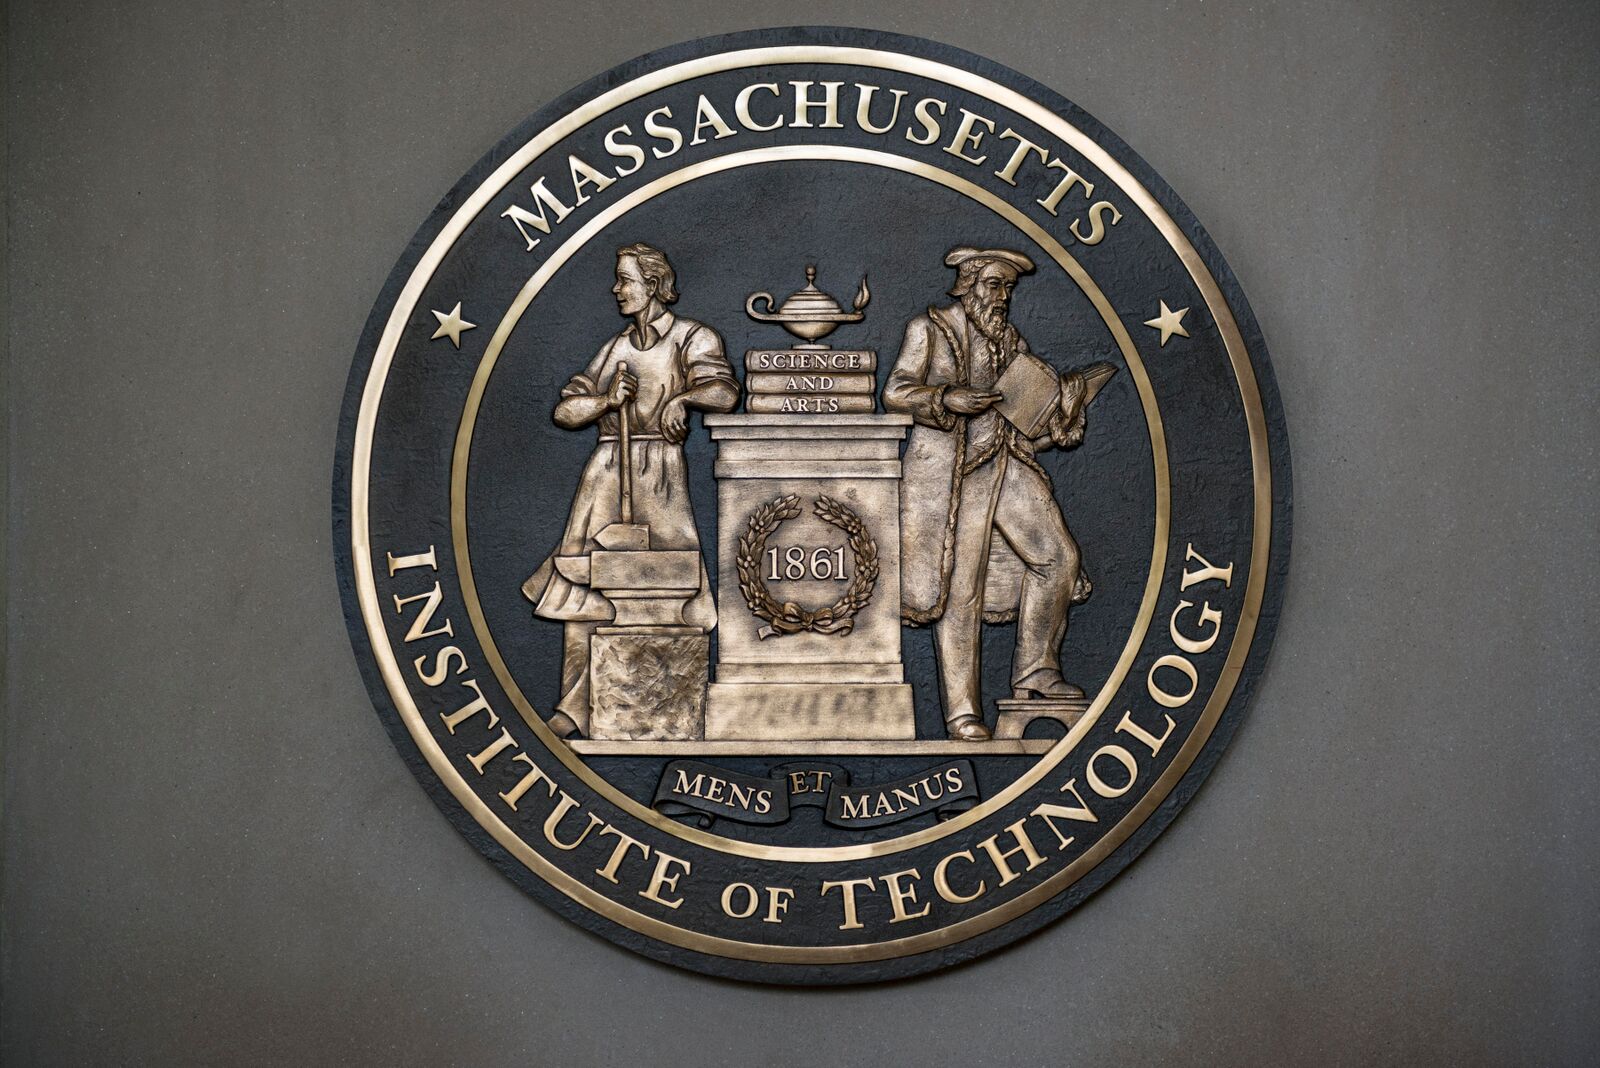 A large, metal rendering of the MIT seal. The background is dark gray, and the type and illustration are in a bronze tone.